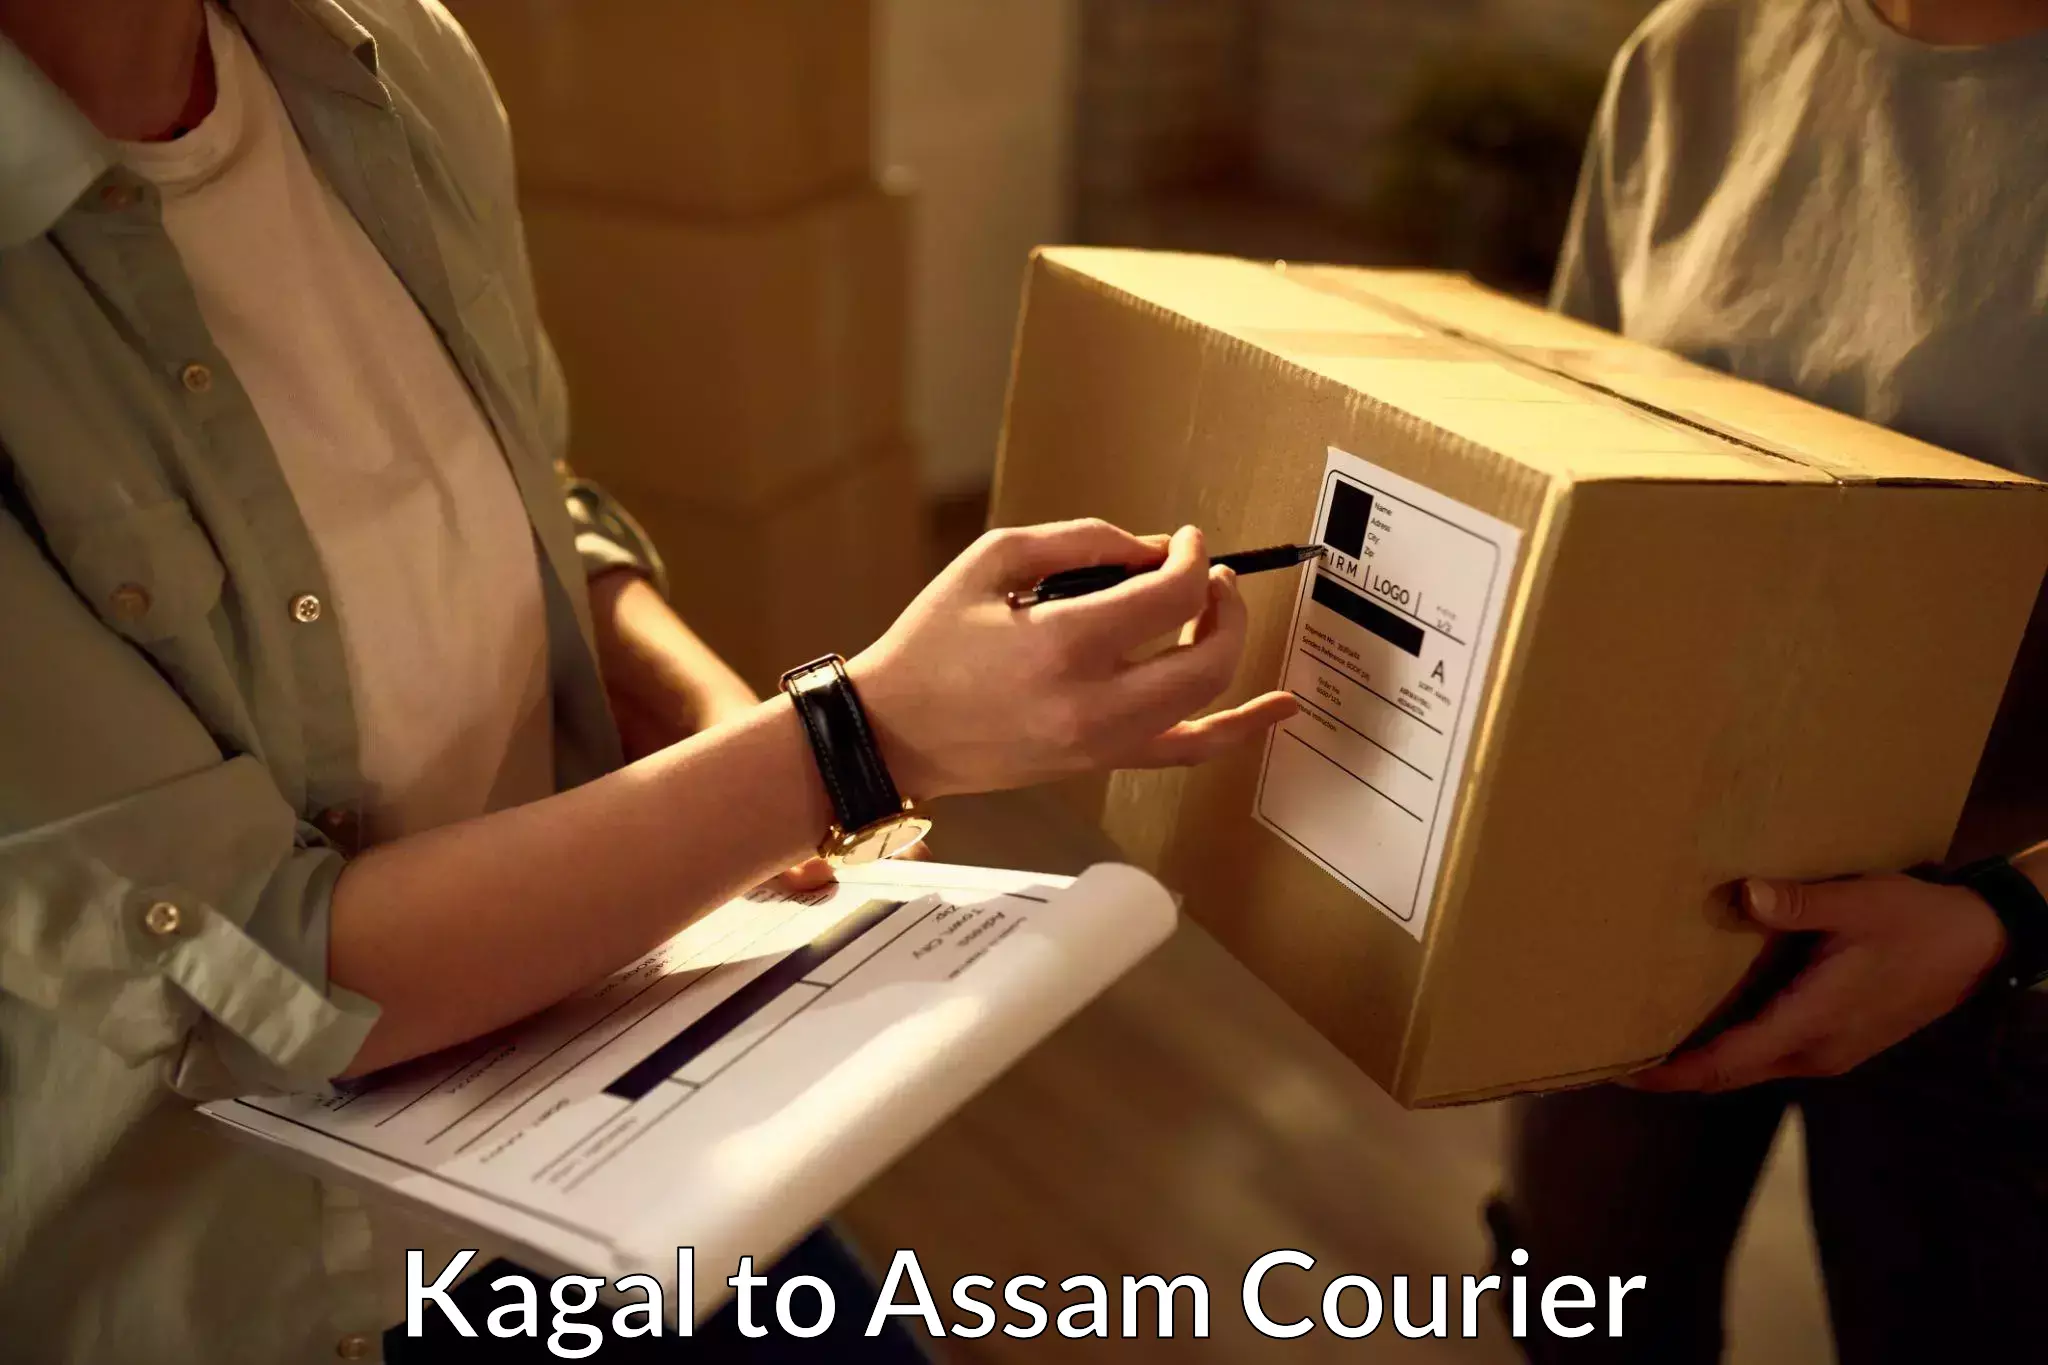 Local delivery service Kagal to Assam